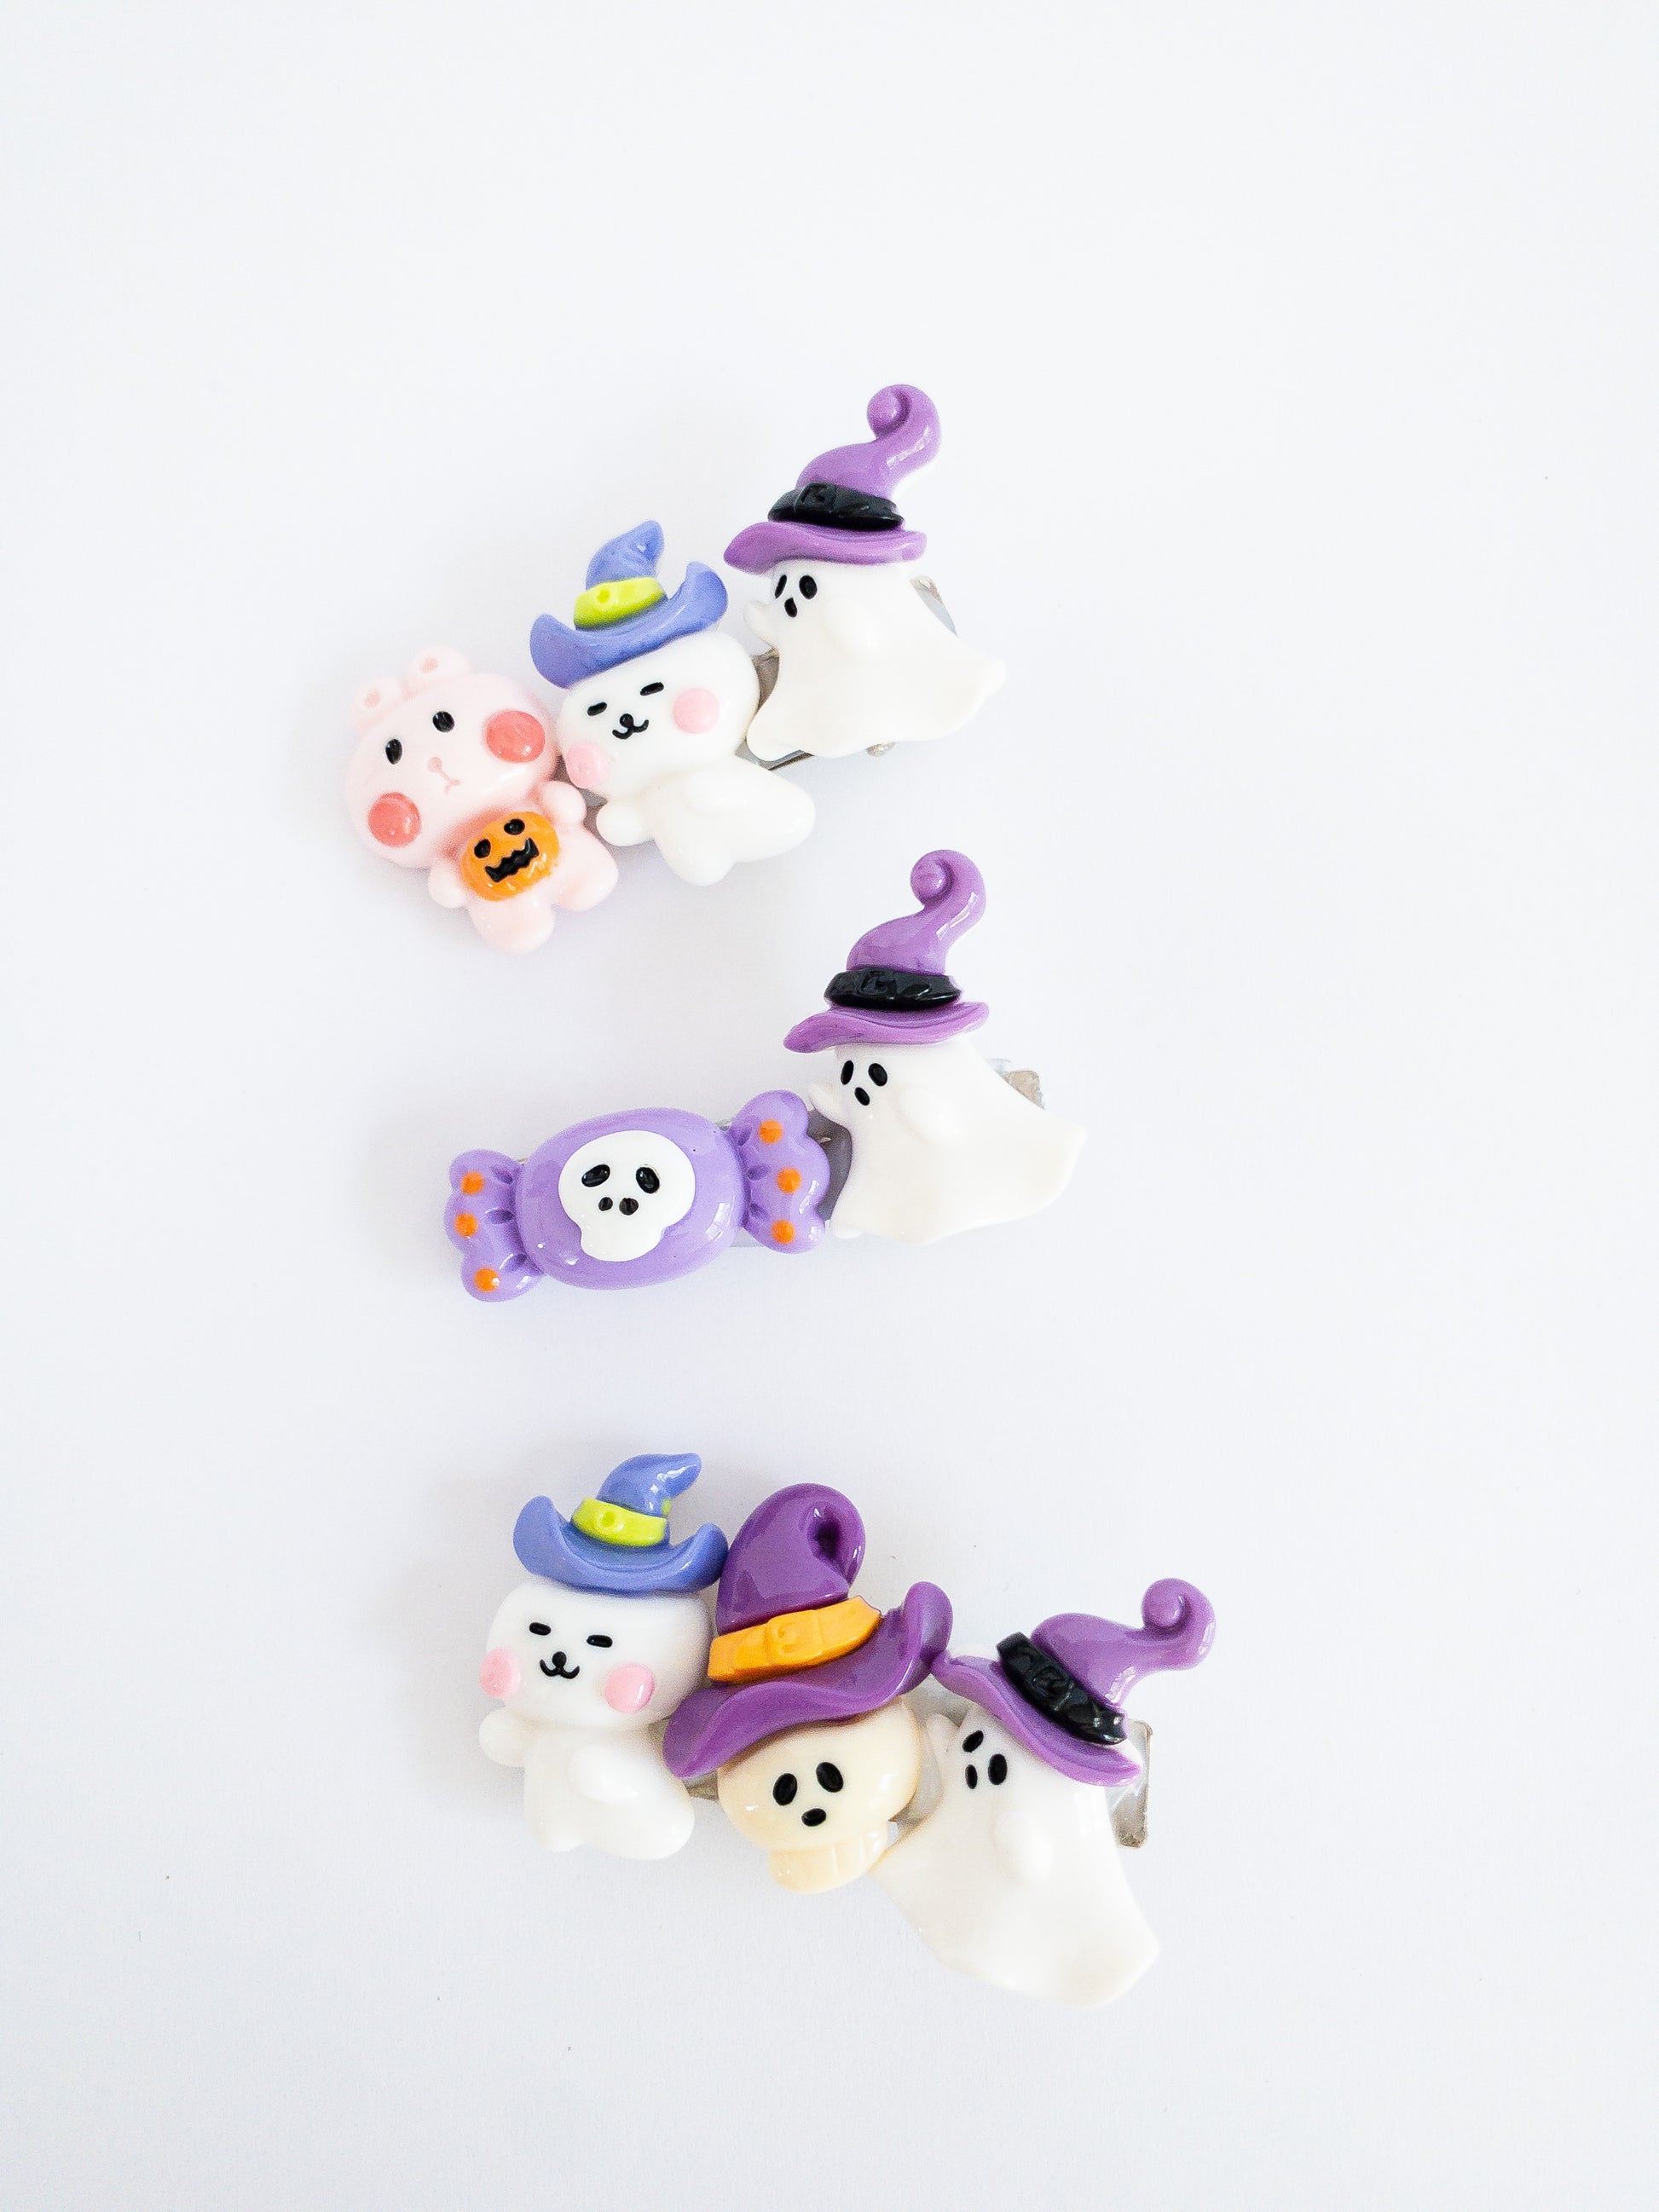 A rabbit, ghost witch, and skeleton go trick or treating in this fun, festive hair clip set. Each set comes with 3 hair clips with a variety of characters each on an alligator clip.